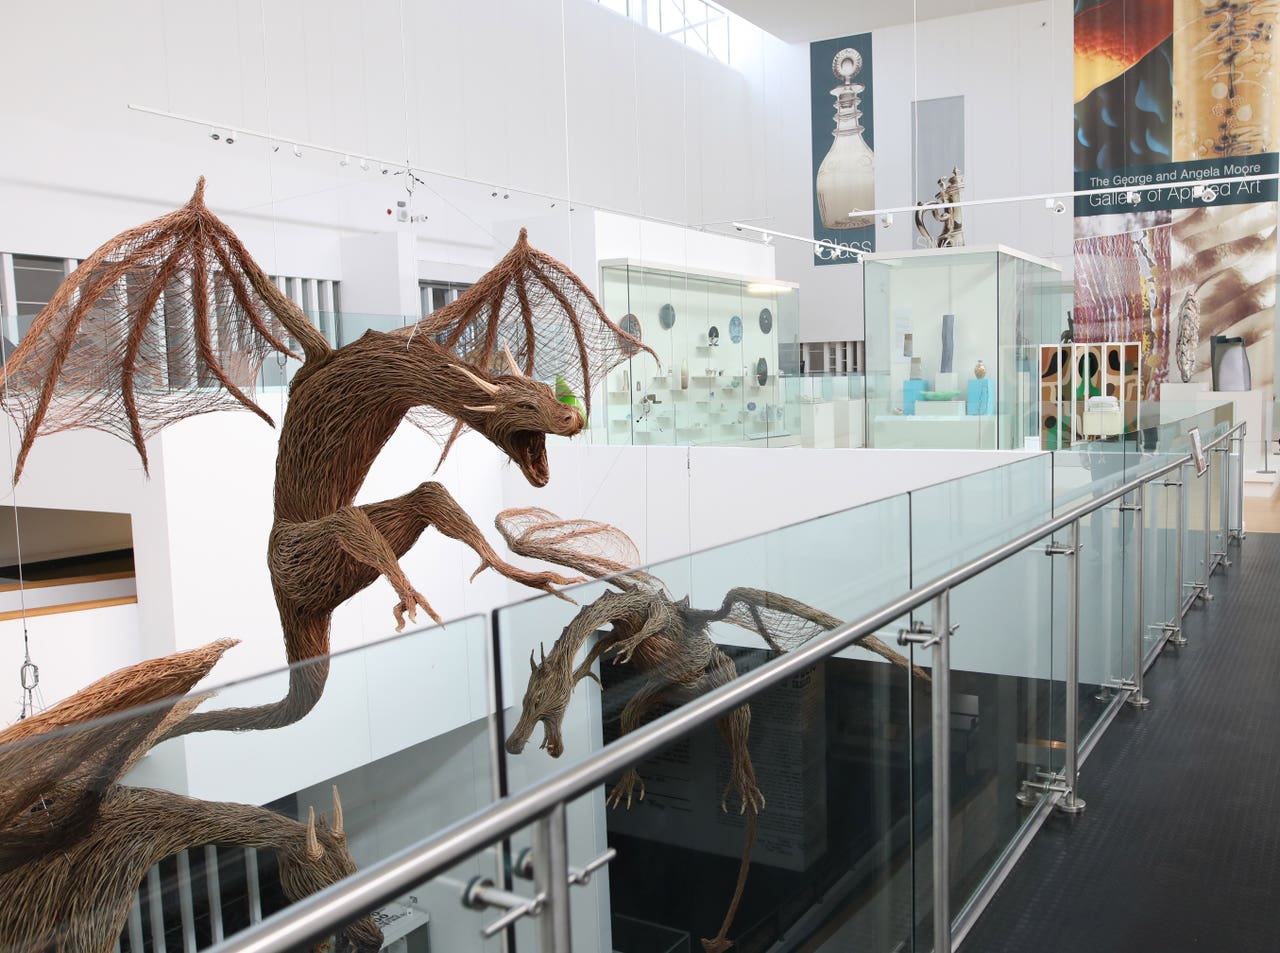 Ulster Museum reopens for first time since Covid-19 lockdown